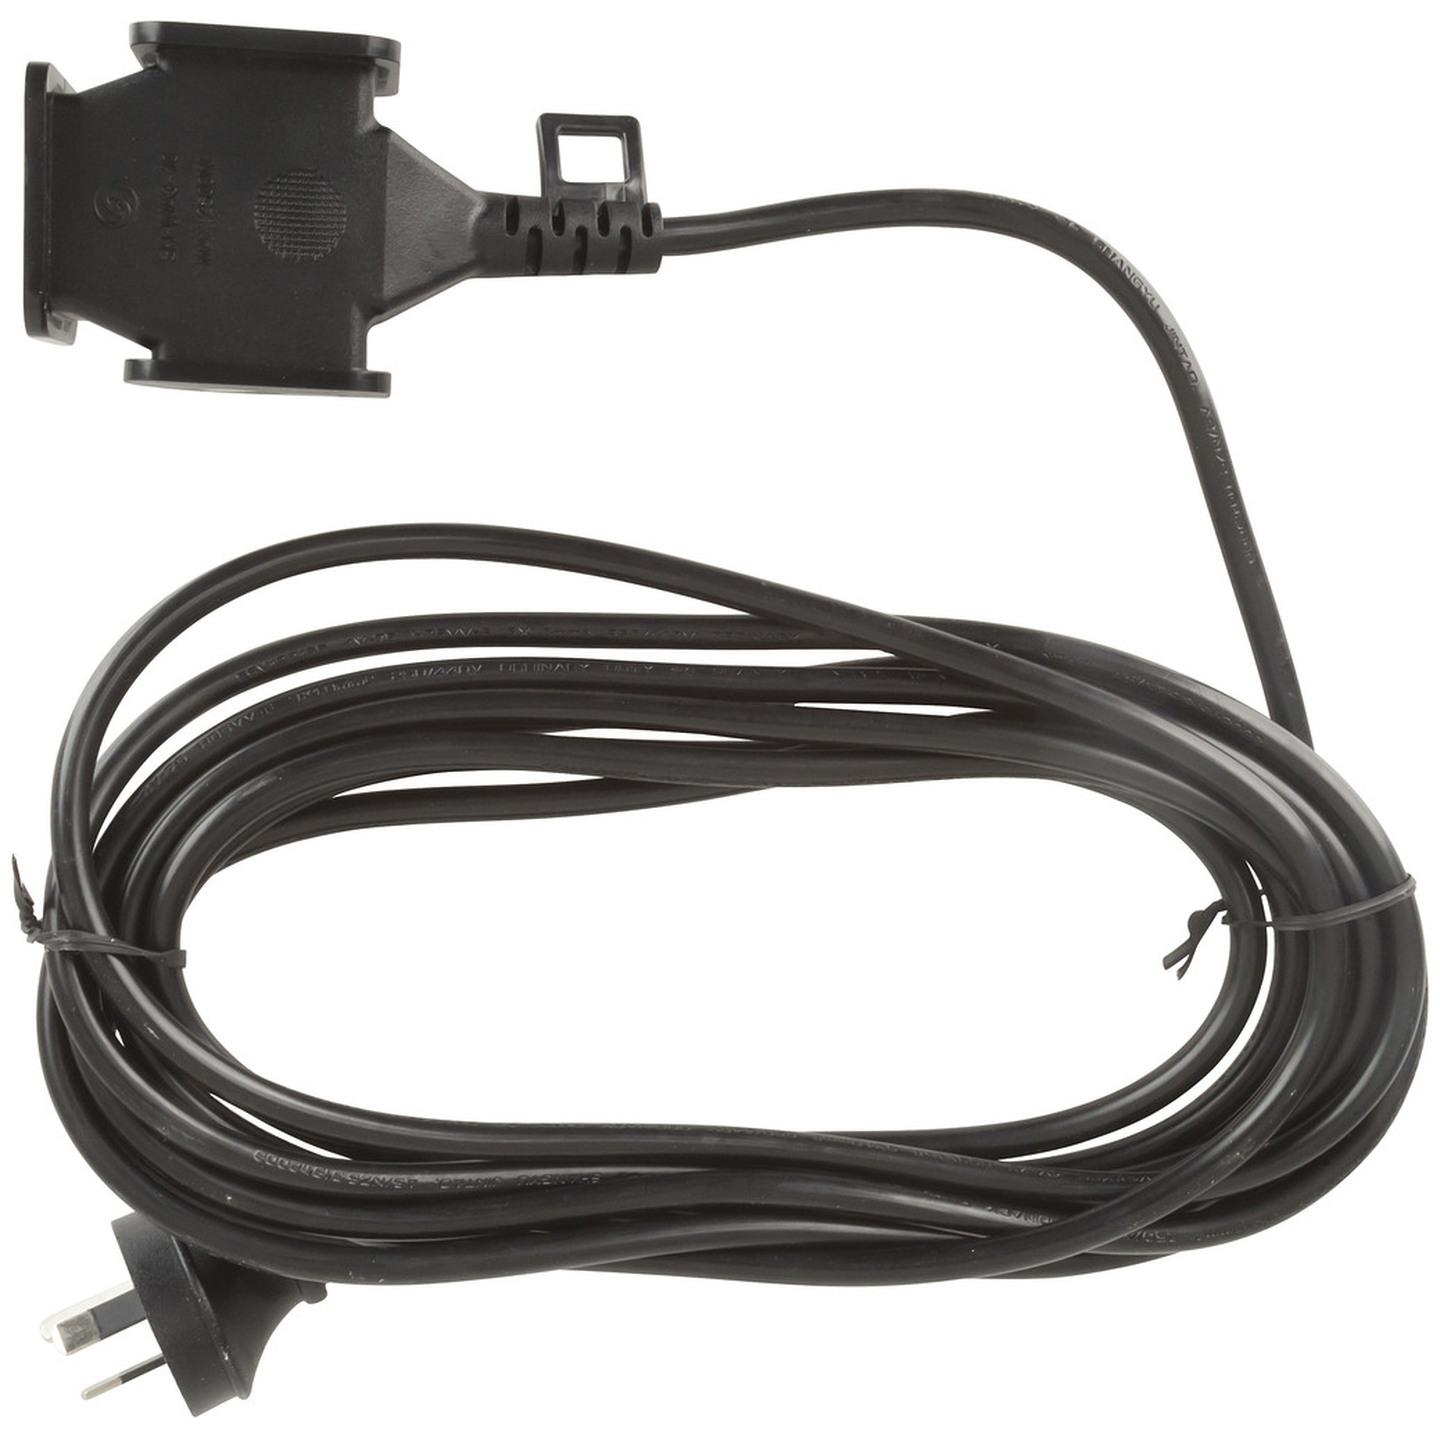 5m extension lead with 3 outlets BLK